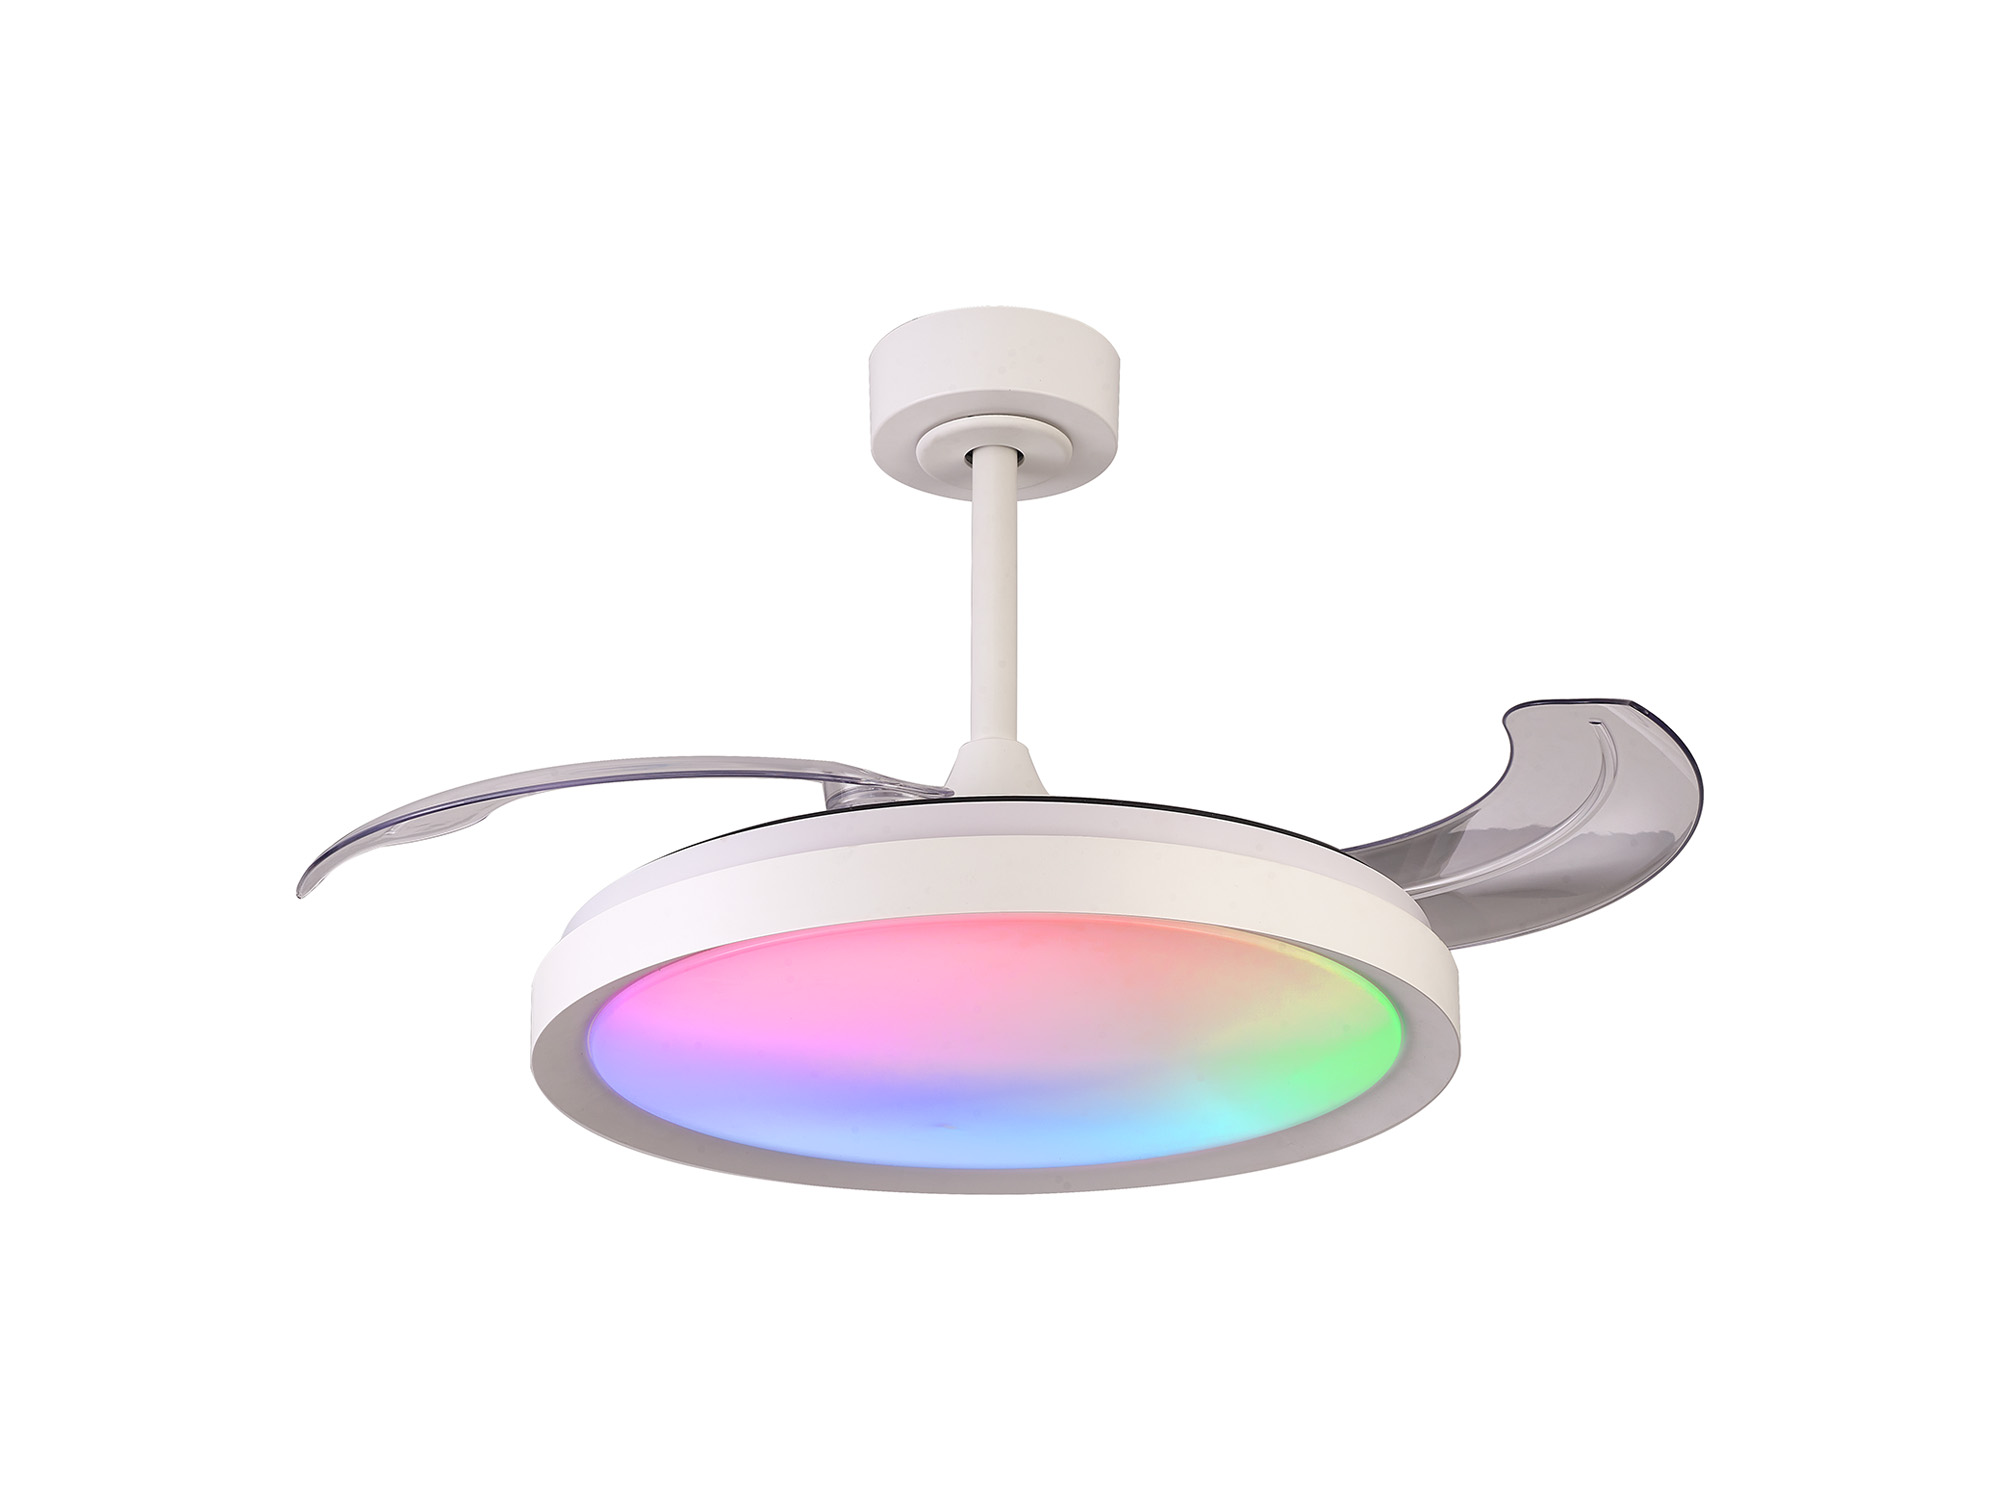 M8758  Siberia 50W LED Dimmable White/RGB Ceiling Light With Built-In 30W DC Fan, 3000-6500K Remote Control, White